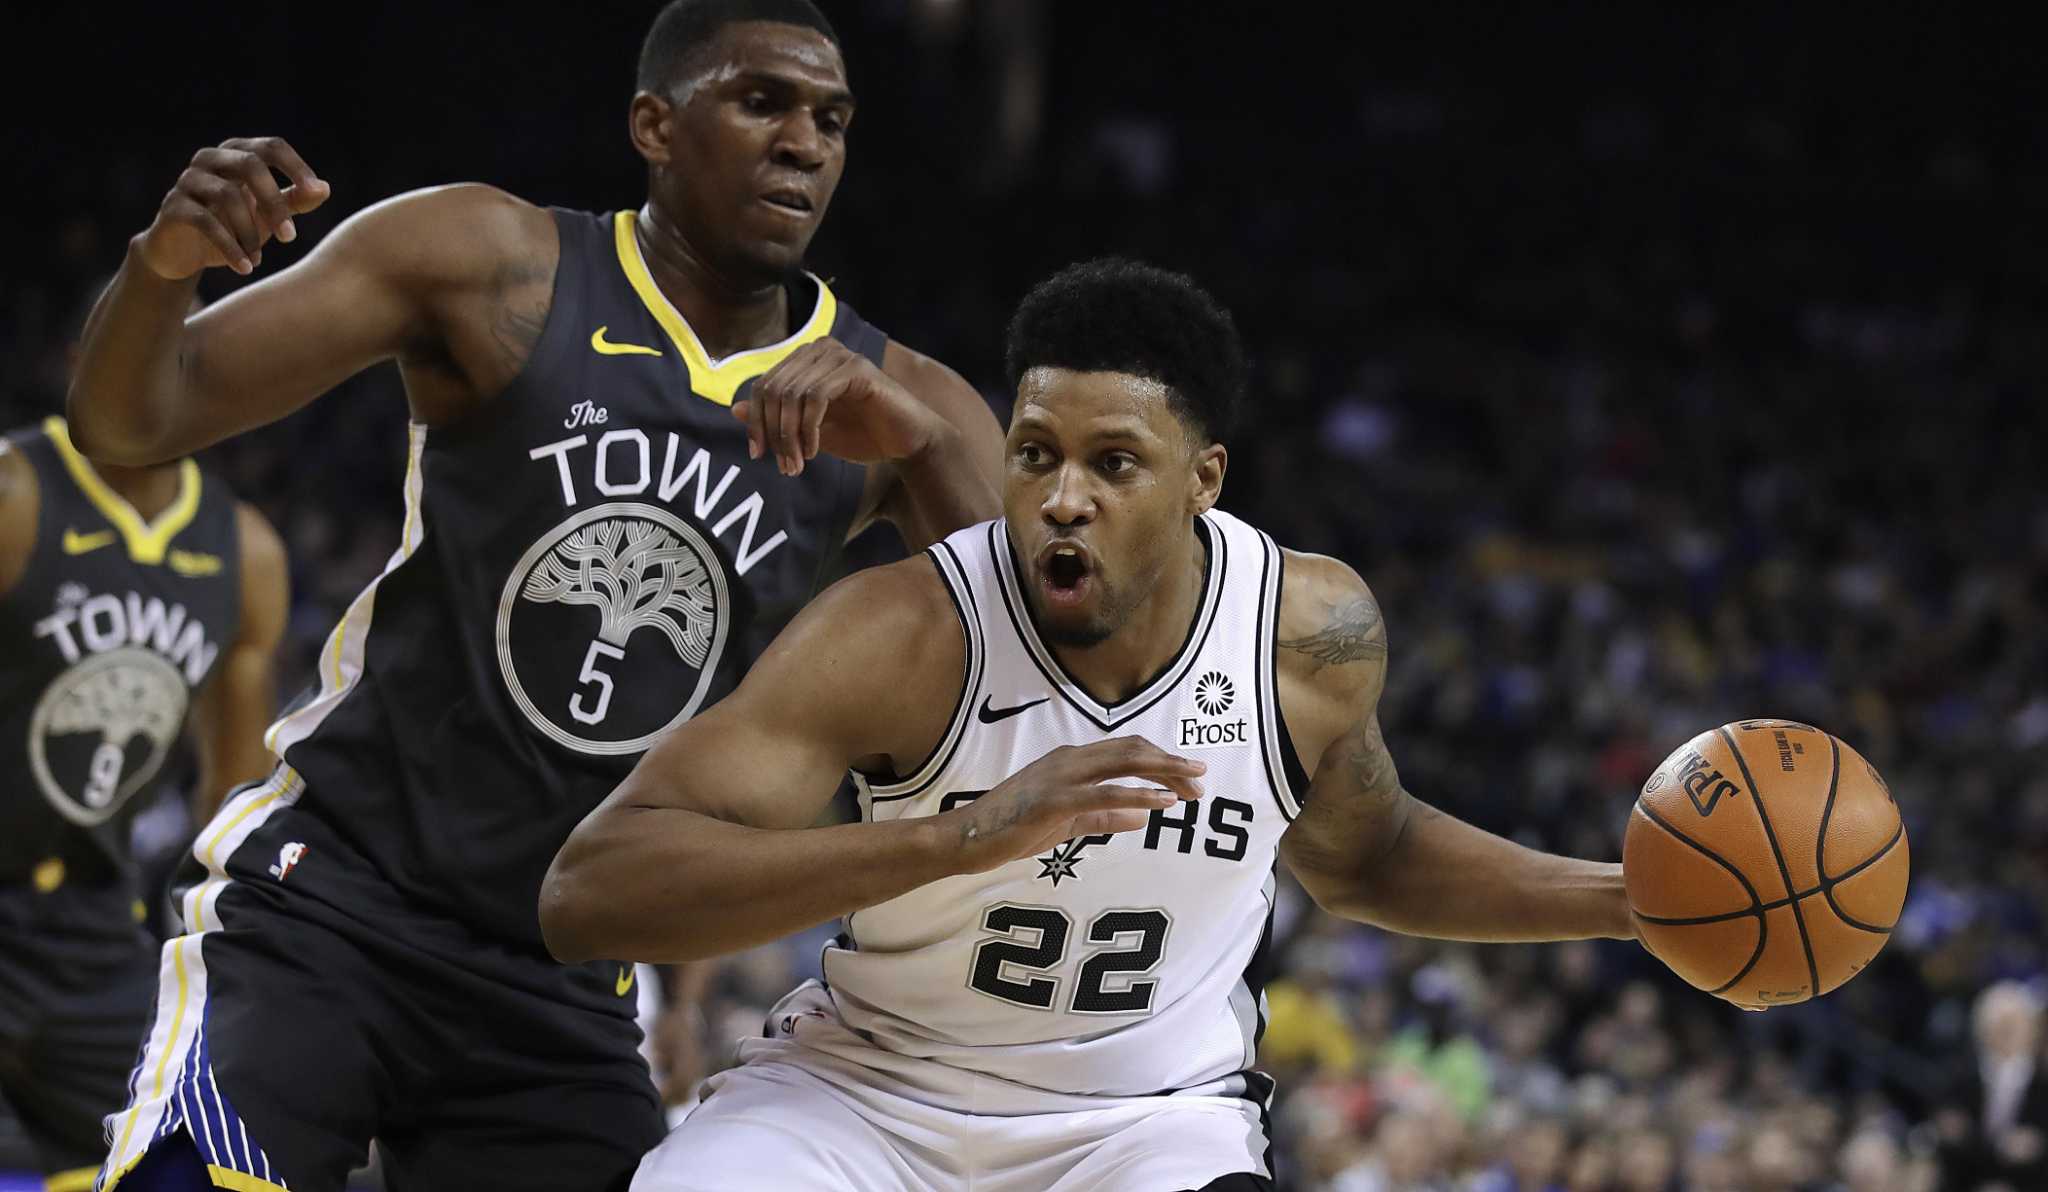 Undermanned against the ‘best team,’ Spurs routed